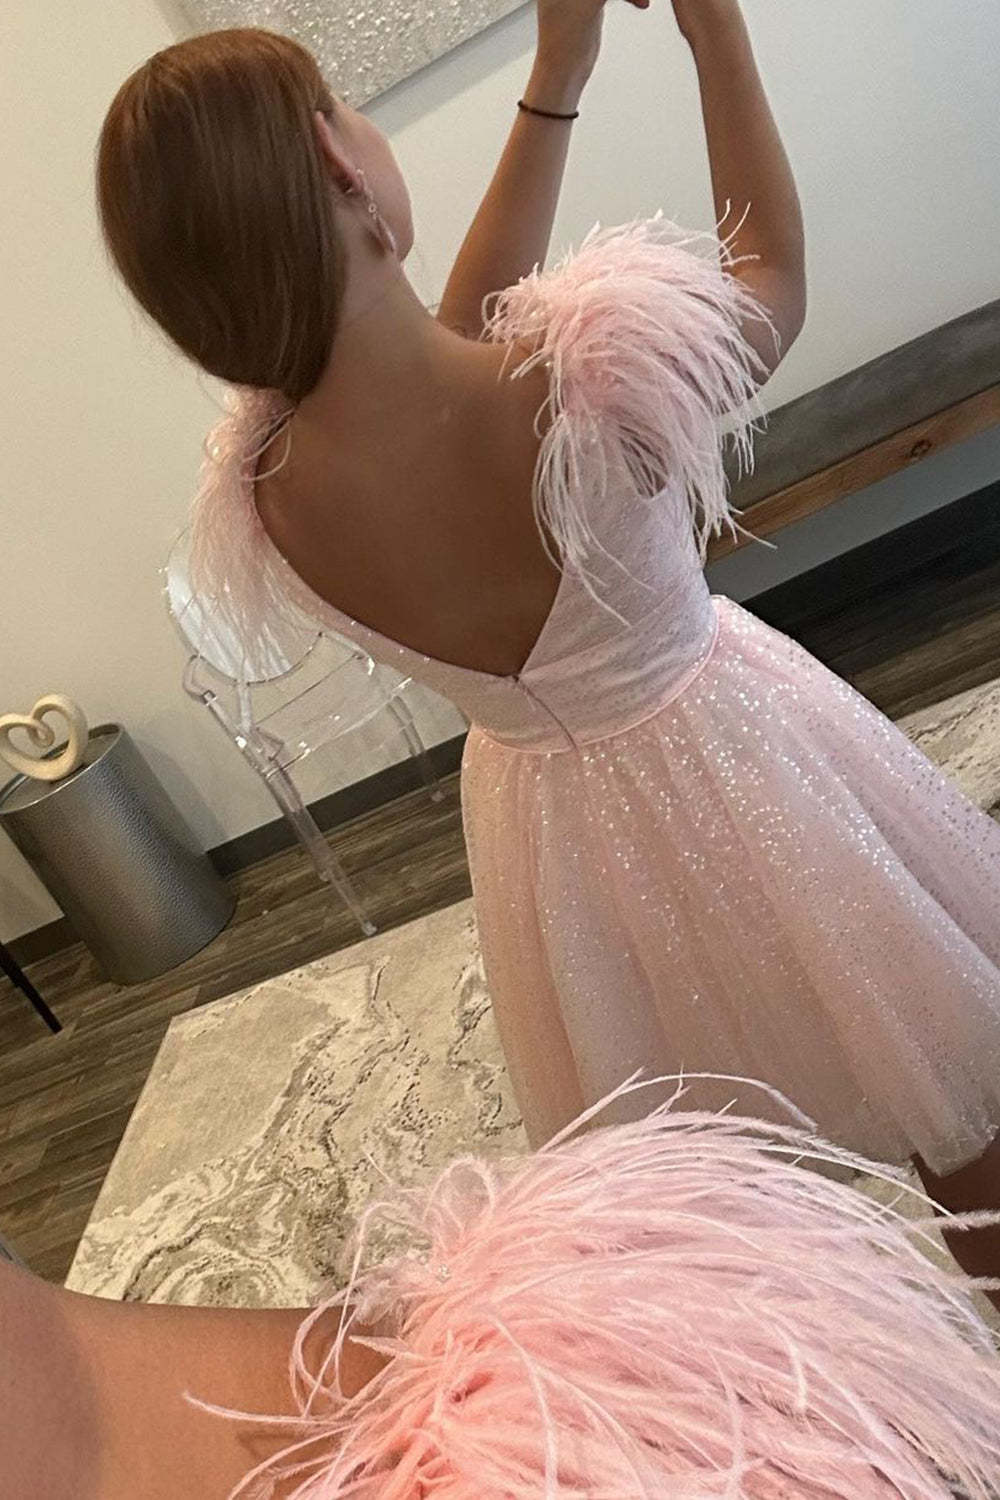 A Line Deep V Neck Light Pink Short Homecoming Dress with Feather